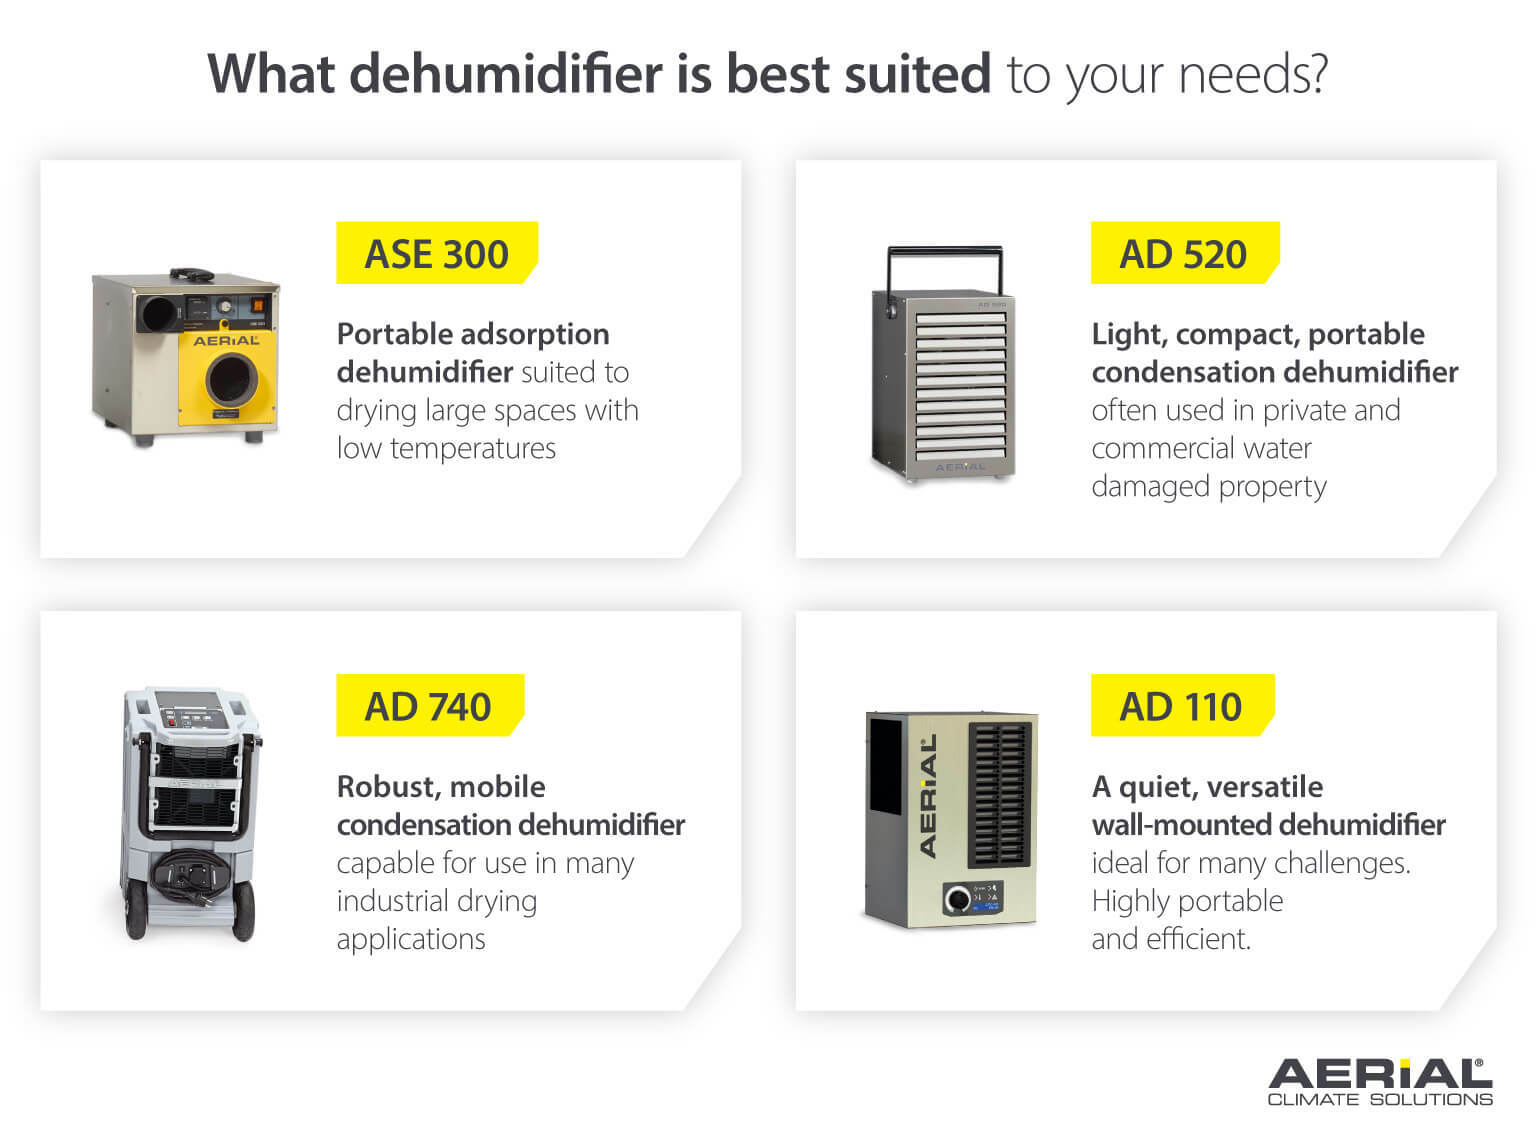 Product showcase comparing 4 commercial dehumidifiers for different needs - Image infographic